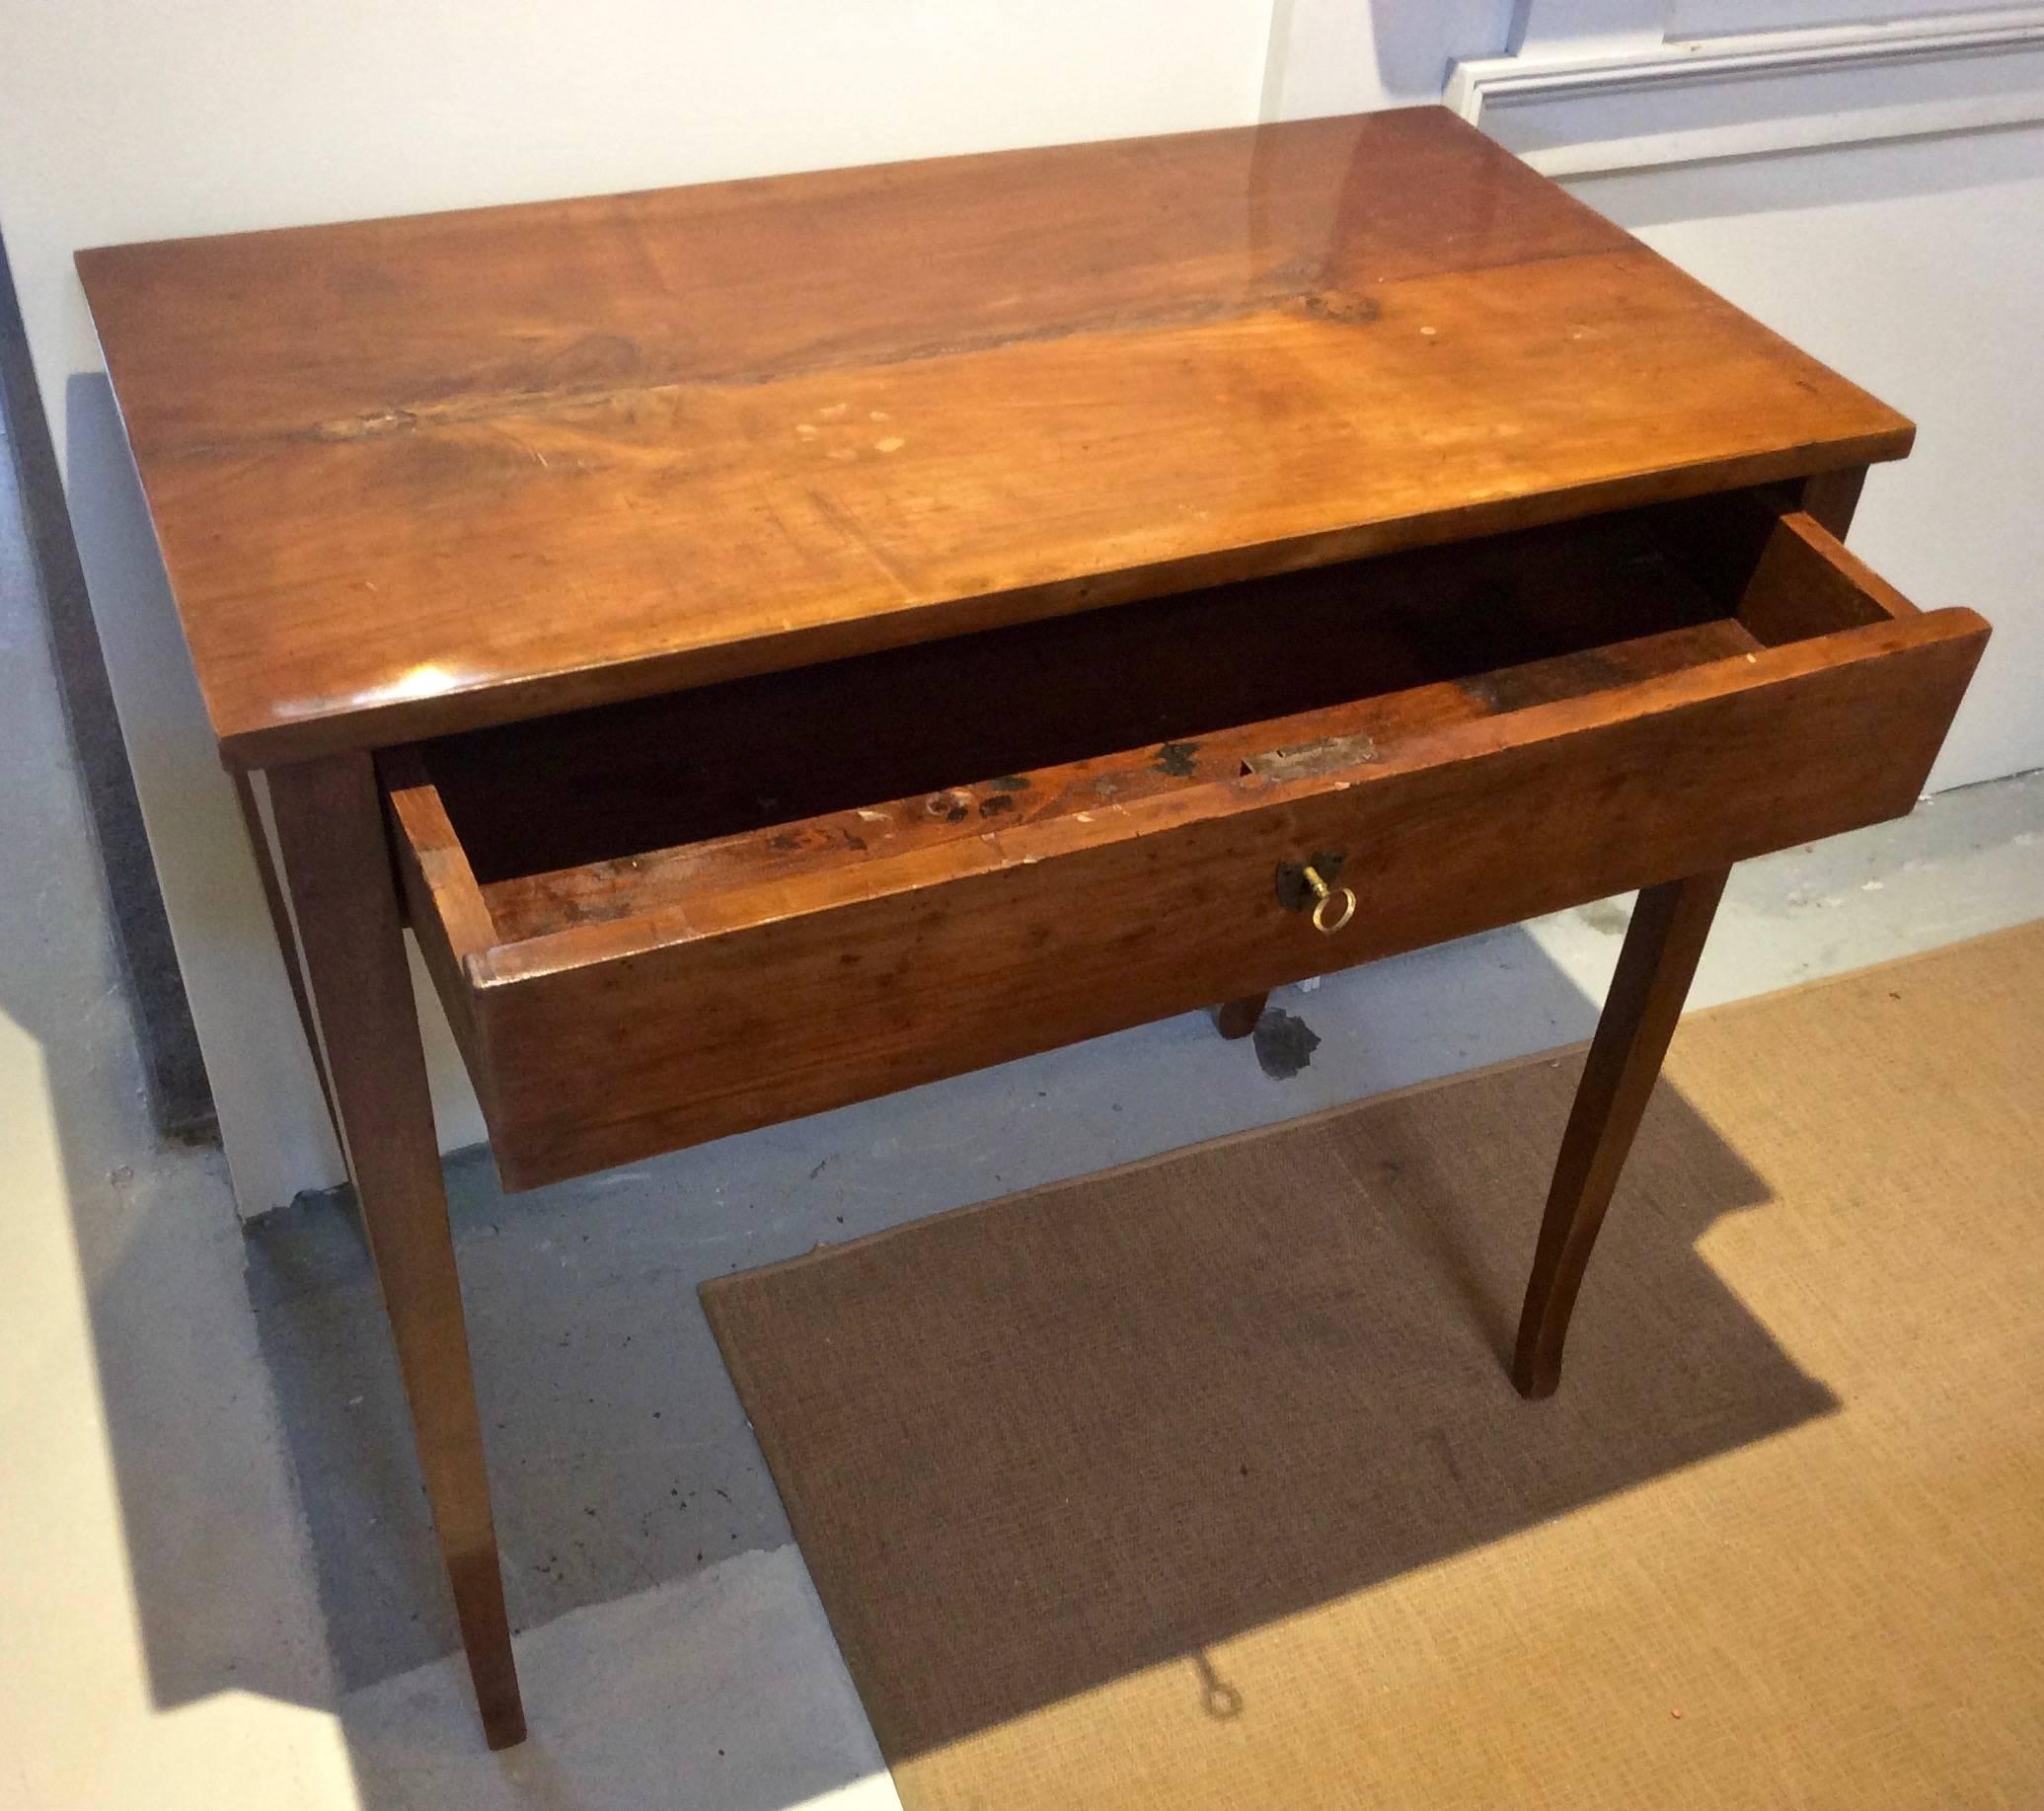 Lovely antique table, from published home in Architectural Digest designed by Jeffrey Bilhiber. Writing table has beautiful warm honeyed patina, tapered legs and original lock and key, and if selected by Mr. Bilhuber, than you know its of fine